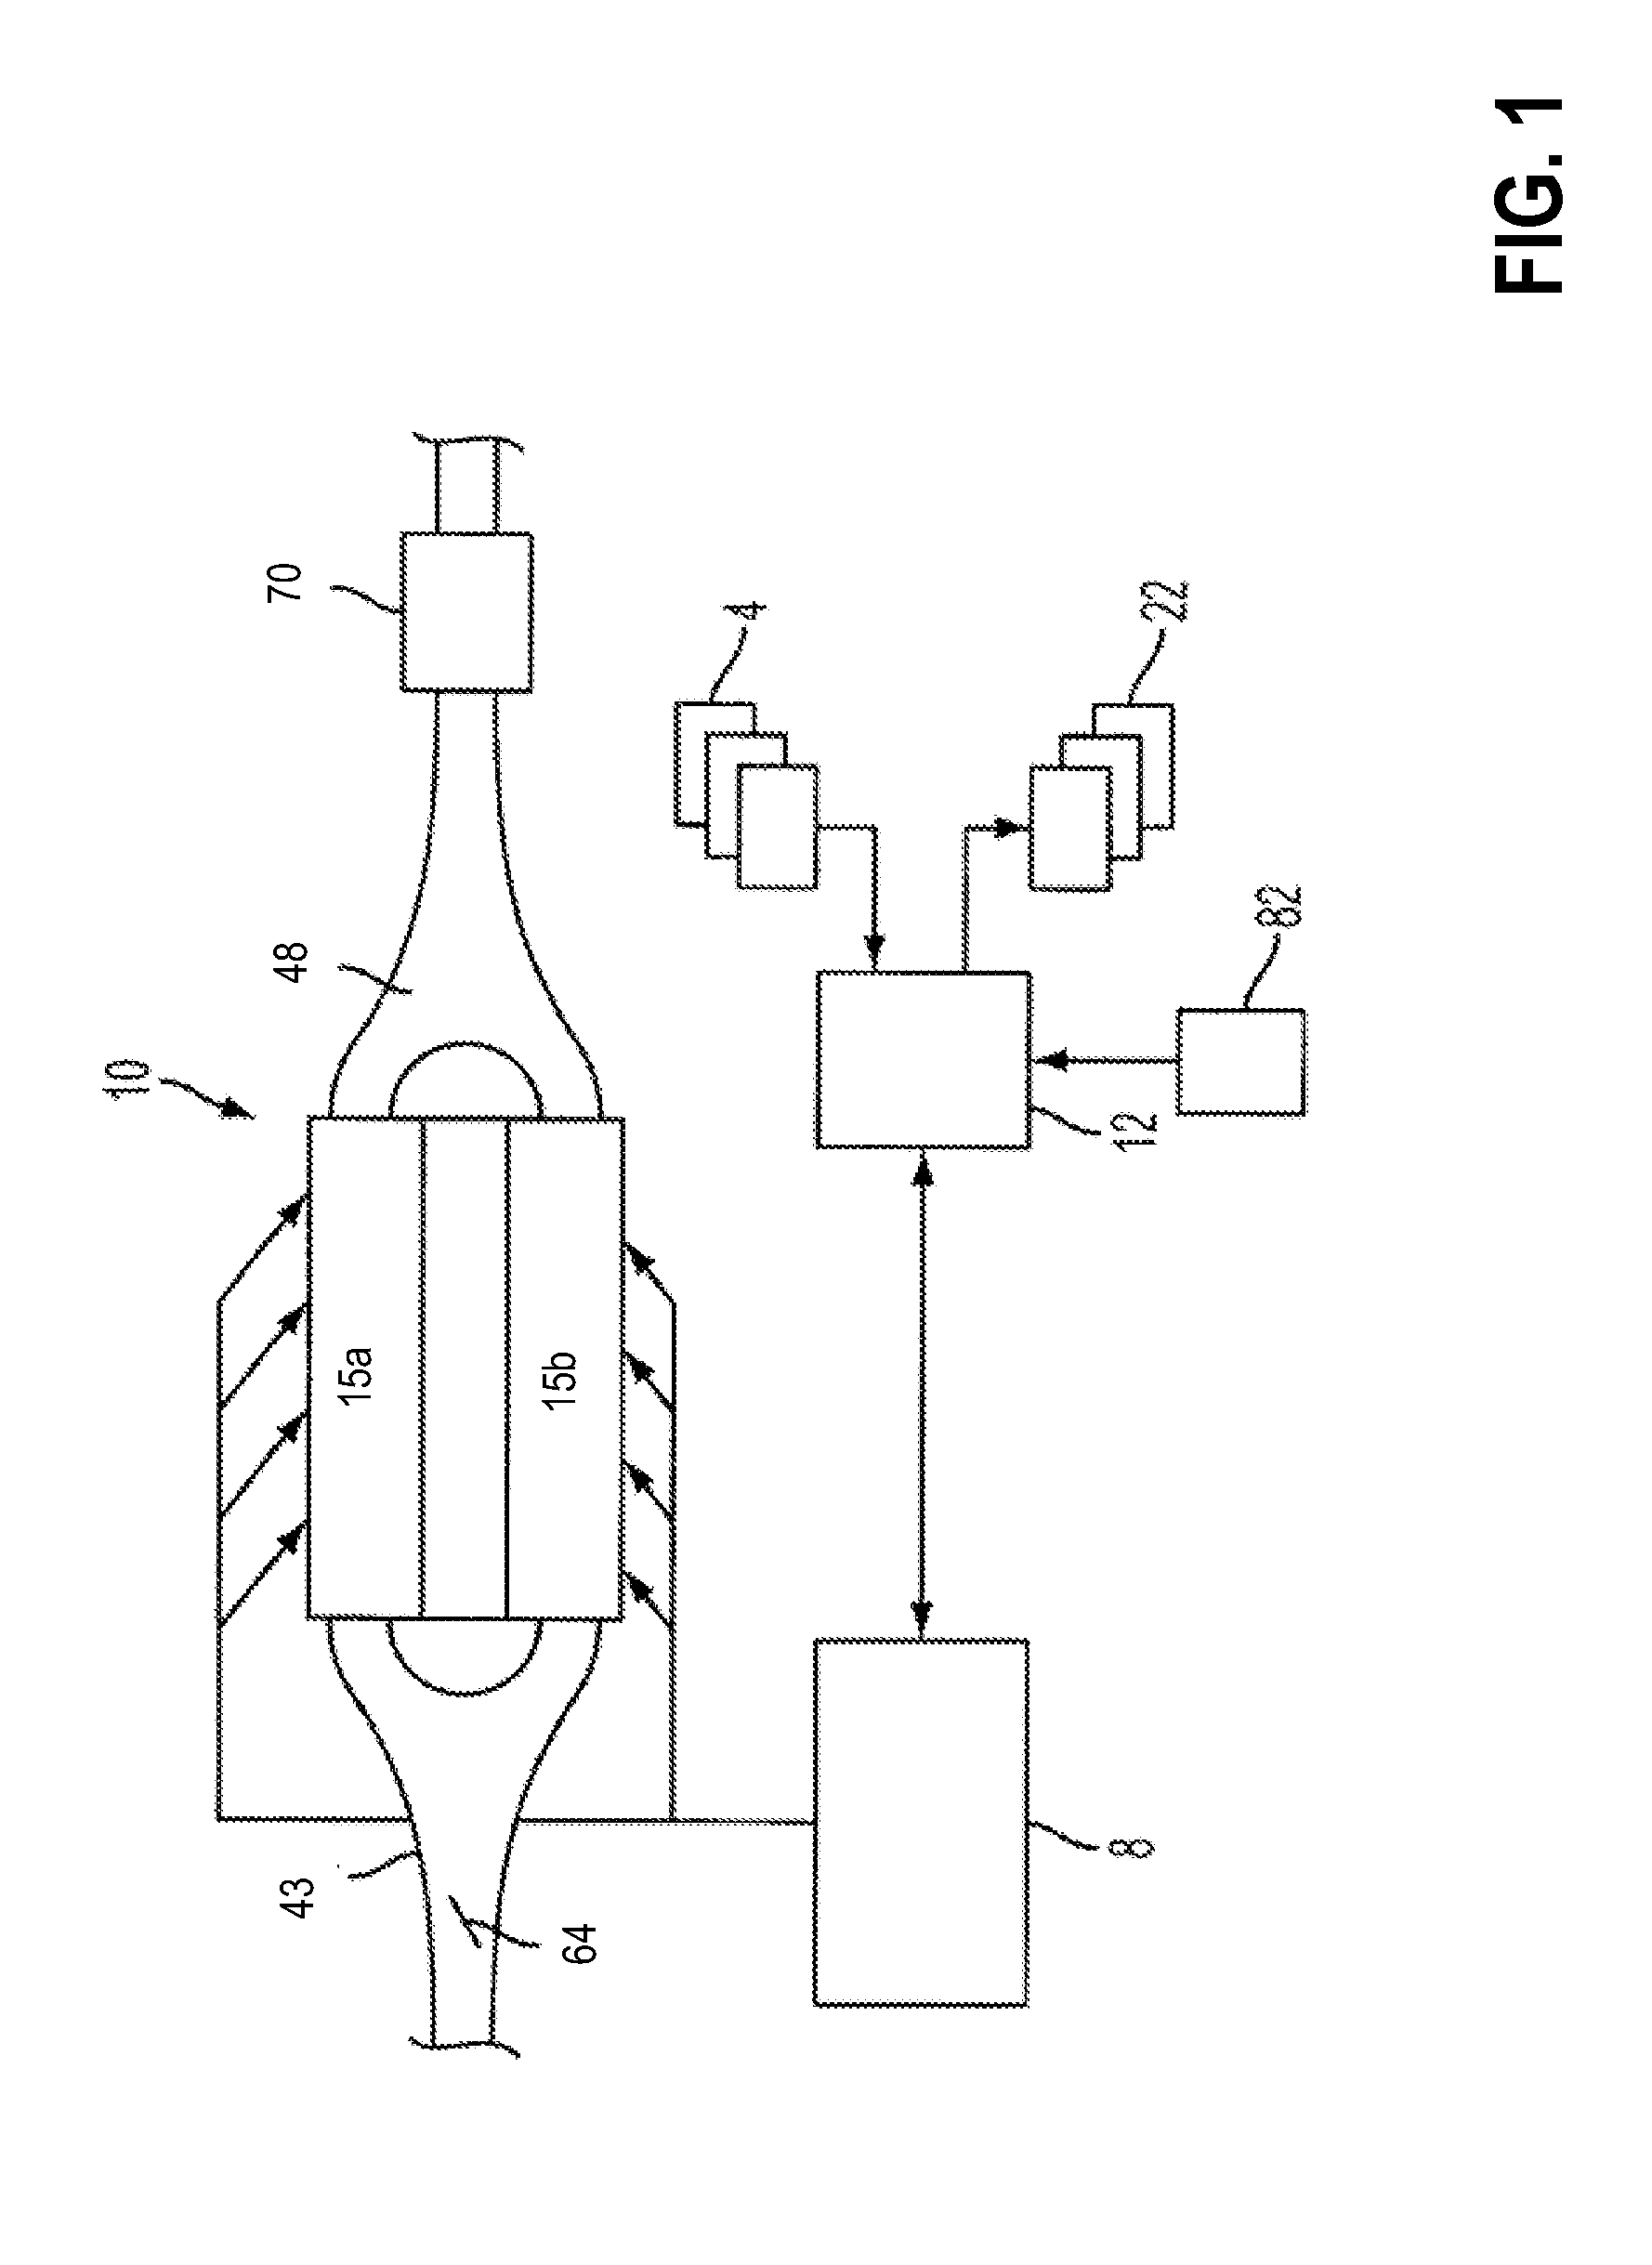 Method of fuel injection for a variable displacement engine